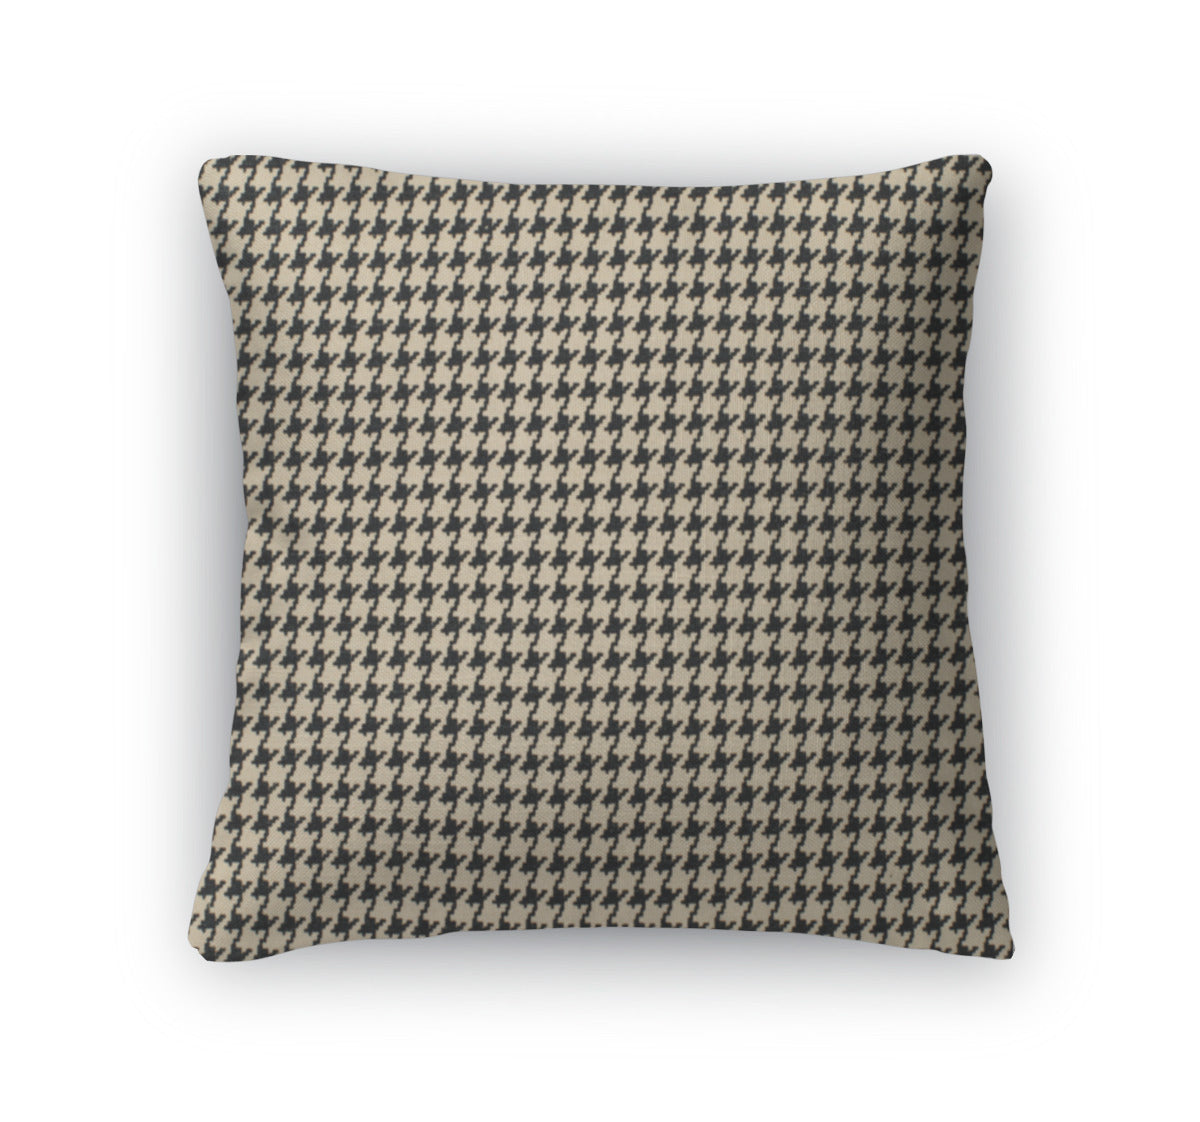 Throw Pillow, Black And Brown Houndstooth Pattern